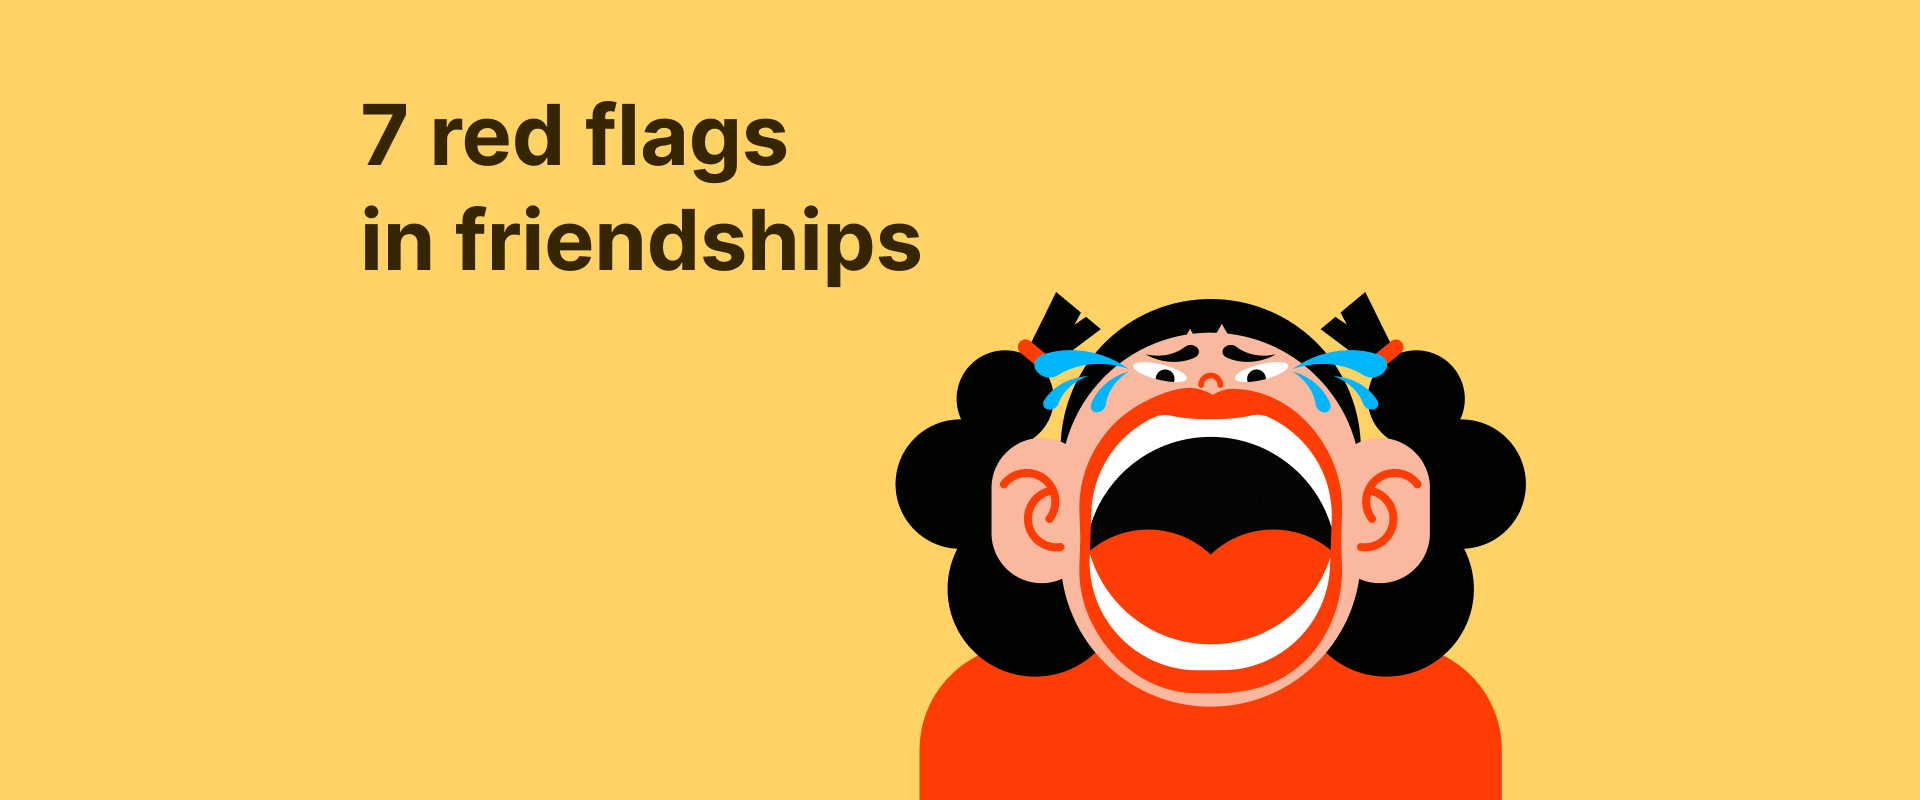 7 red flags in friendships